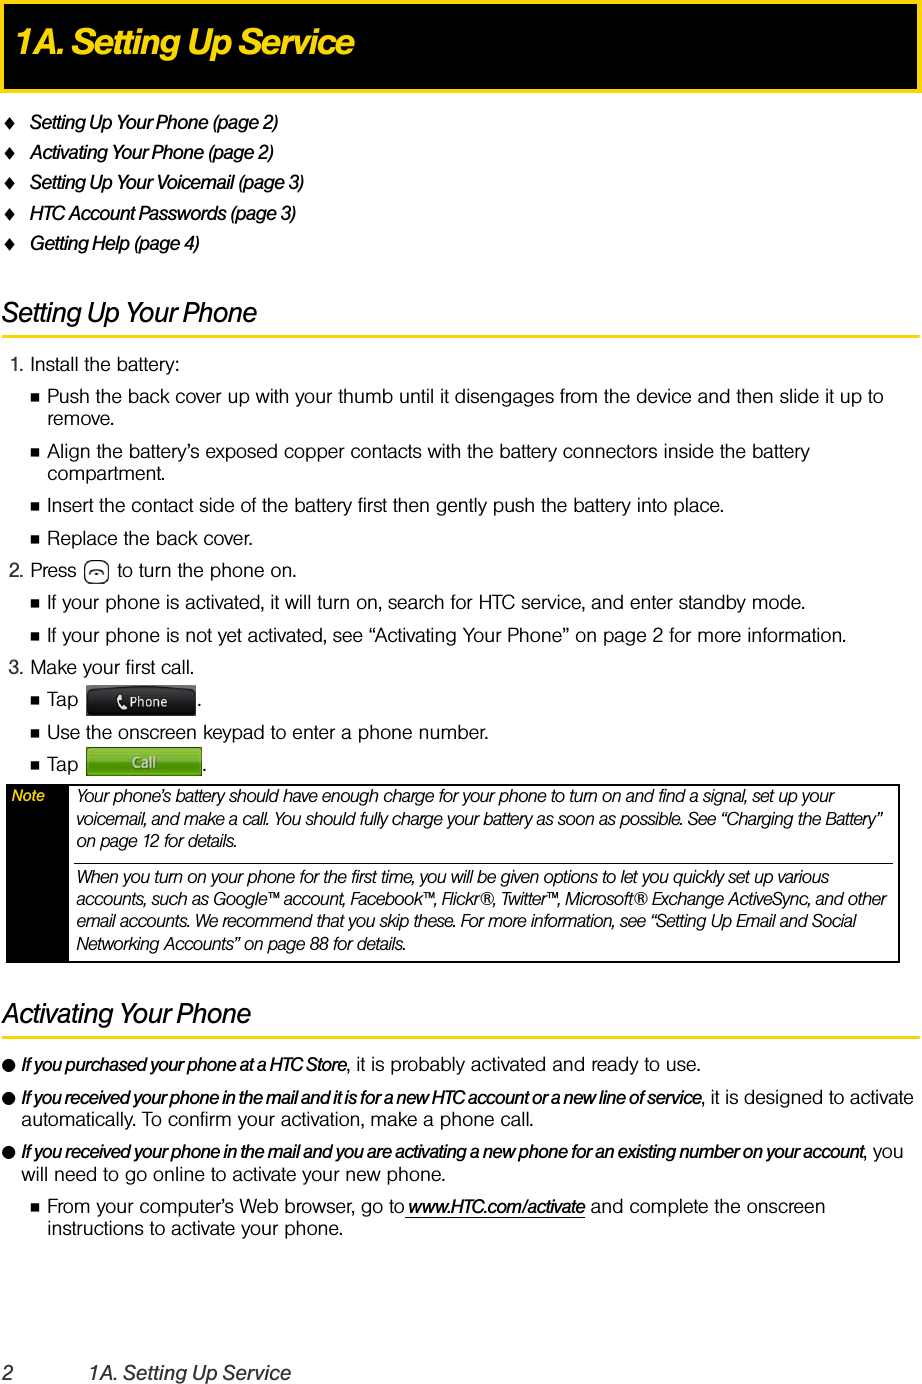 2 1A. Setting Up ServiceࡗSetting Up Your Phone (page 2)ࡗActivating Your Phone (page 2)ࡗSetting Up Your Voicemail (page 3) ࡗHTC Account Passwords (page 3)ࡗGetting Help (page 4)Setting Up Your Phone1. Install the battery:ⅢPush the back cover up with your thumb until it disengages from the device and then slide it up to remove.ⅢAlign the battery’s exposed copper contacts with the battery connectors inside the battery compartment.ⅢInsert the contact side of the battery first then gently push the battery into place.ⅢReplace the back cover. 2. Press   to turn the phone on. ⅢIf your phone is activated, it will turn on, search for HTC service, and enter standby mode. ⅢIf your phone is not yet activated, see “Activating Your Phone” on page 2 for more information.3. Make your first call.ⅢTap .ⅢUse the onscreen keypad to enter a phone number.ⅢTap . Activating Your PhoneⅷIf you purchased your phone at a HTC Store, it is probably activated and ready to use.ⅷIf you received your phone in the mail and it is for a new HTC account or a new line of service, it is designed to activate automatically. To confirm your activation, make a phone call.ⅷIf you received your phone in the mail and you are activating a new phone for an existing number on your account, you will need to go online to activate your new phone.ⅢFrom your computer’s Web browser, go to www.HTC.com/activate and complete the onscreen instructions to activate your phone.1A. Setting Up ServiceNote Your phone’s battery should have enough charge for your phone to turn on and find a signal, set up your voicemail, and make a call. You should fully charge your battery as soon as possible. See “Charging the Battery” on page 12 for details.When you turn on your phone for the first time, you will be given options to let you quickly set up various accounts, such as Google™ account, Facebook™, Flickr®, Twitter™, Microsoft® Exchange ActiveSync, and other email accounts. We recommend that you skip these. For more information, see “Setting Up Email and Social Networking Accounts” on page 88 for details. 